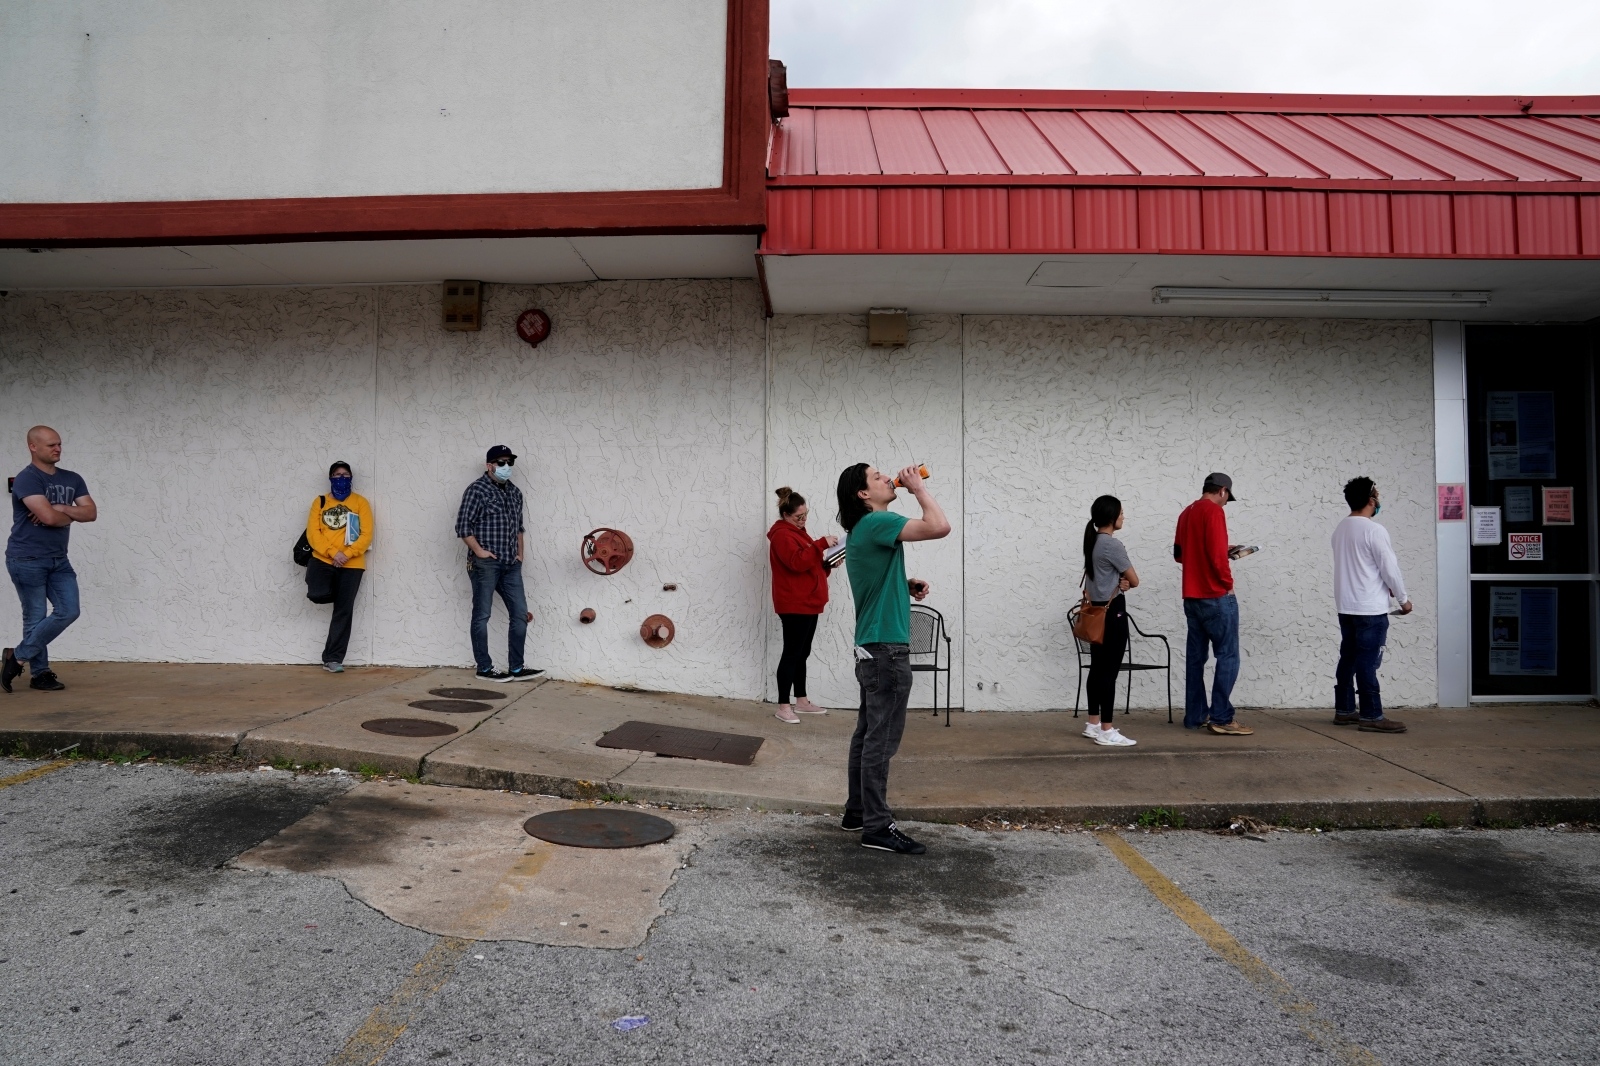 The spread of the coronavirus disease (COVID-19), in Fayetteville People who lost their jobs wait in line to file for unemployment following an outbreak of the coronavirus disease (COVID-19), at an Arkansas Workforce Center in Fayetteville, Arkansas, U.S. April 6, 2020. REUTERS/Nick Oxford NICK OXFORD